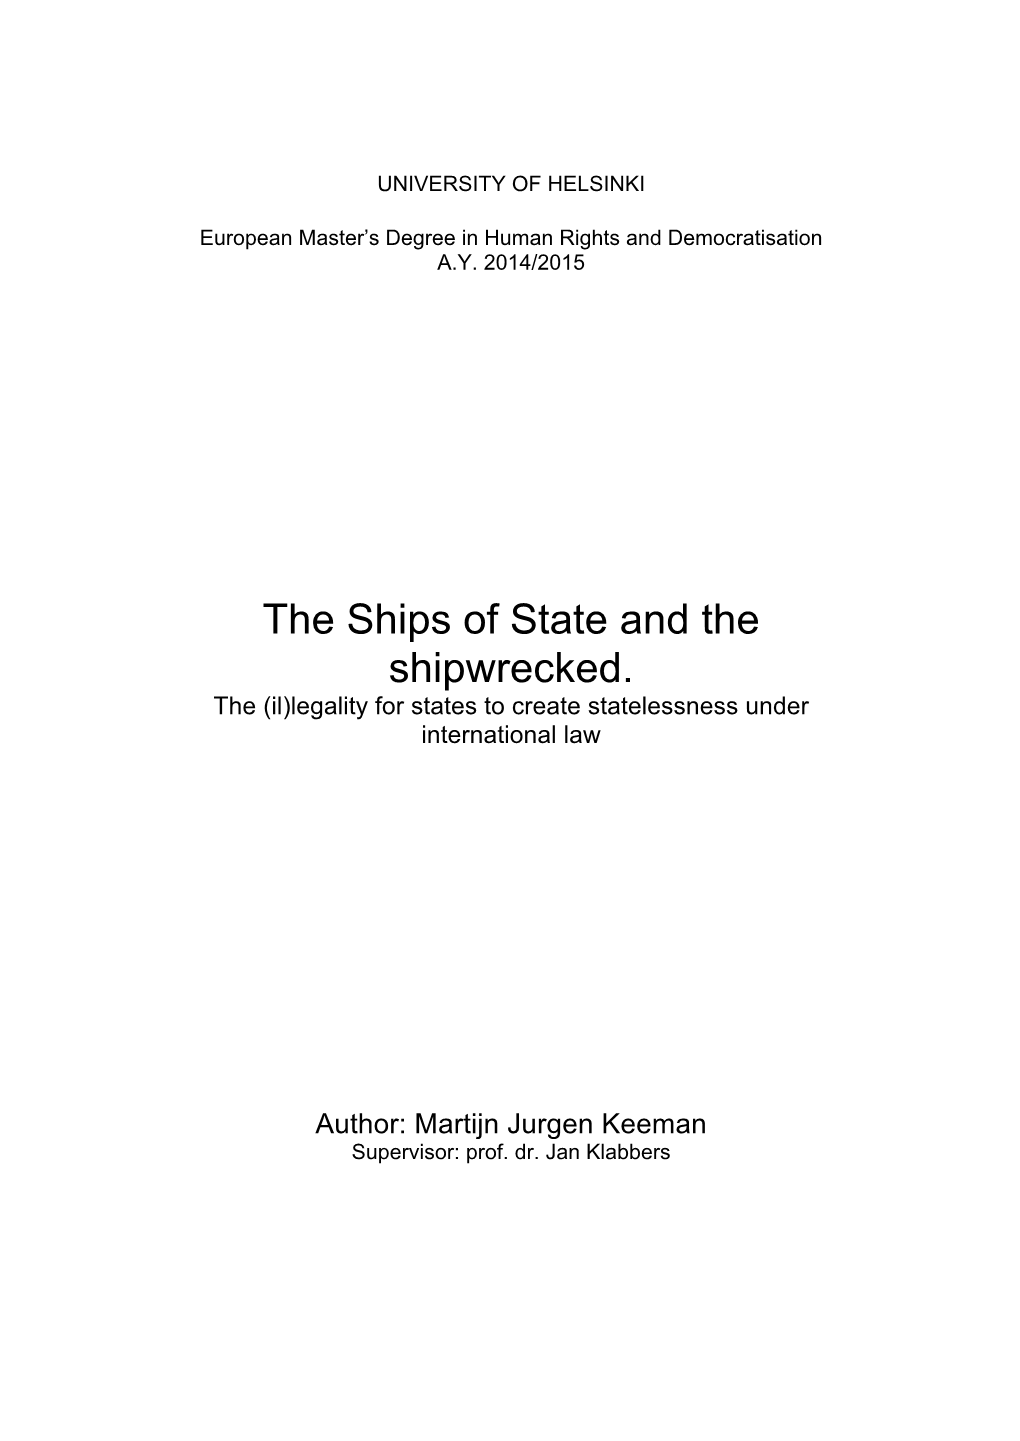 The Ships of State and the Shipwrecked. the (Il)Legality for States to Create Statelessness Under International Law